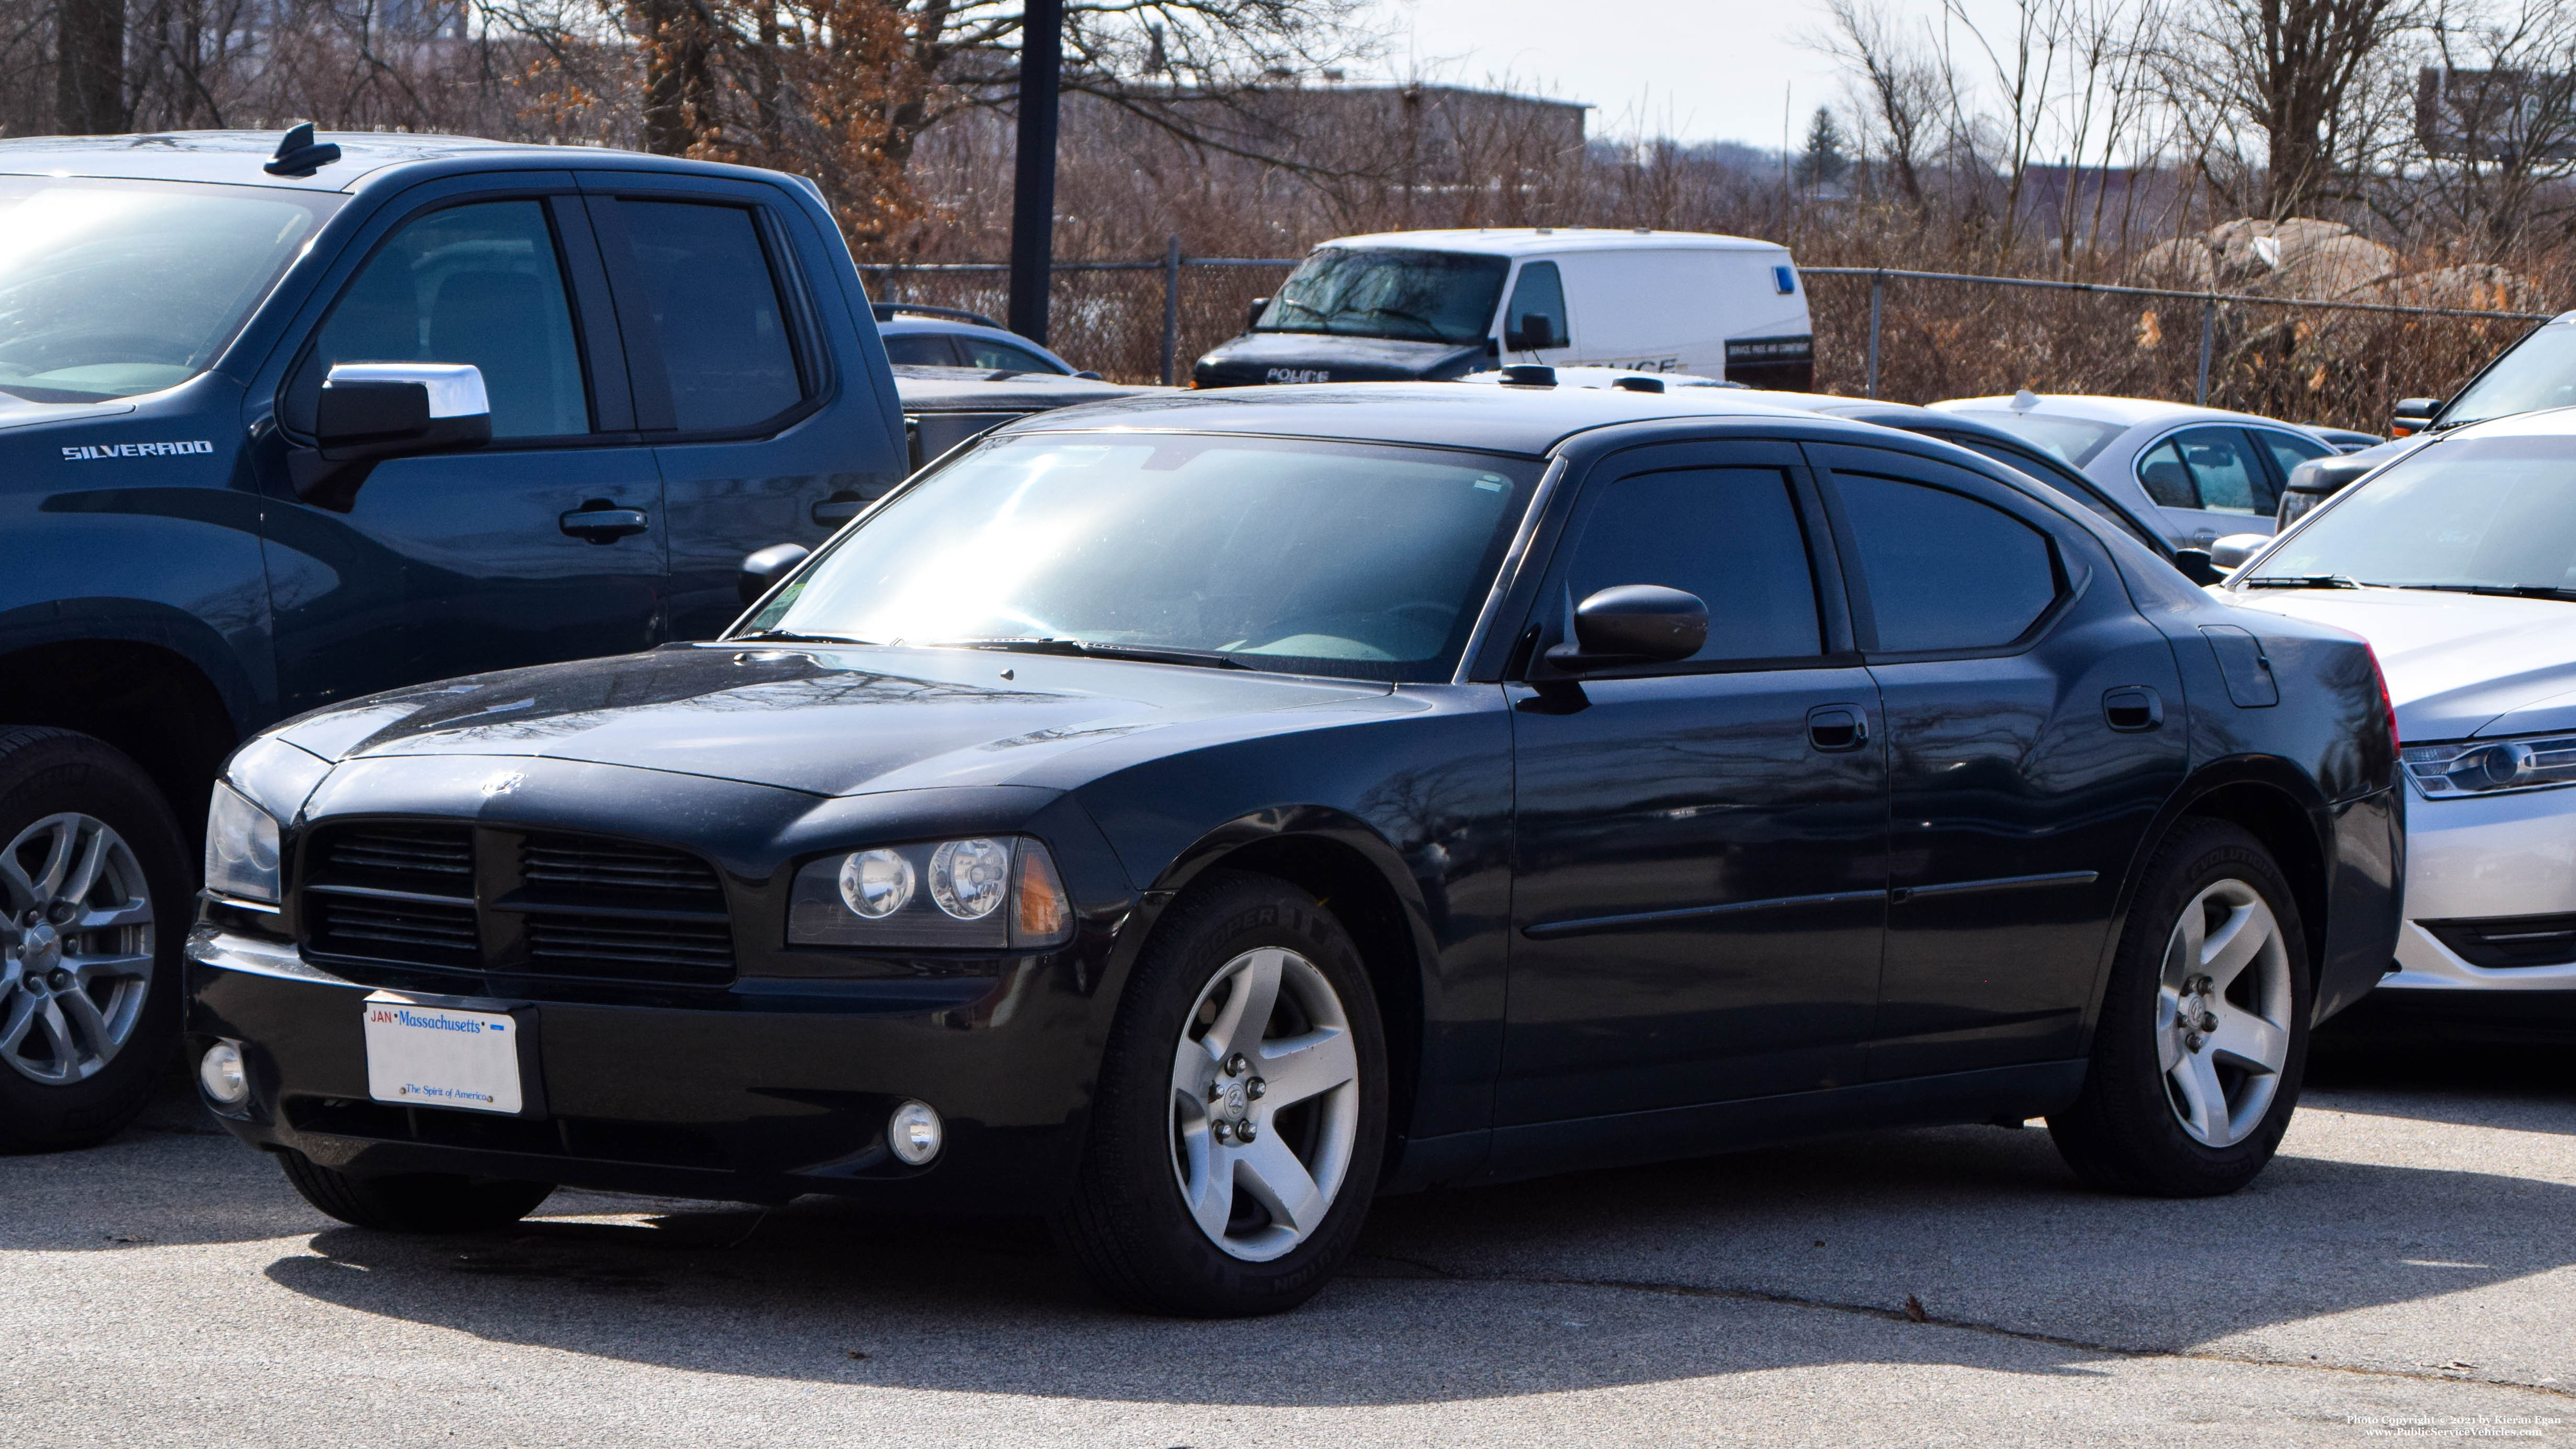 A photo  of Fall River Police
            Unmarked Unit, a 2010 Dodge Charger             taken by Kieran Egan